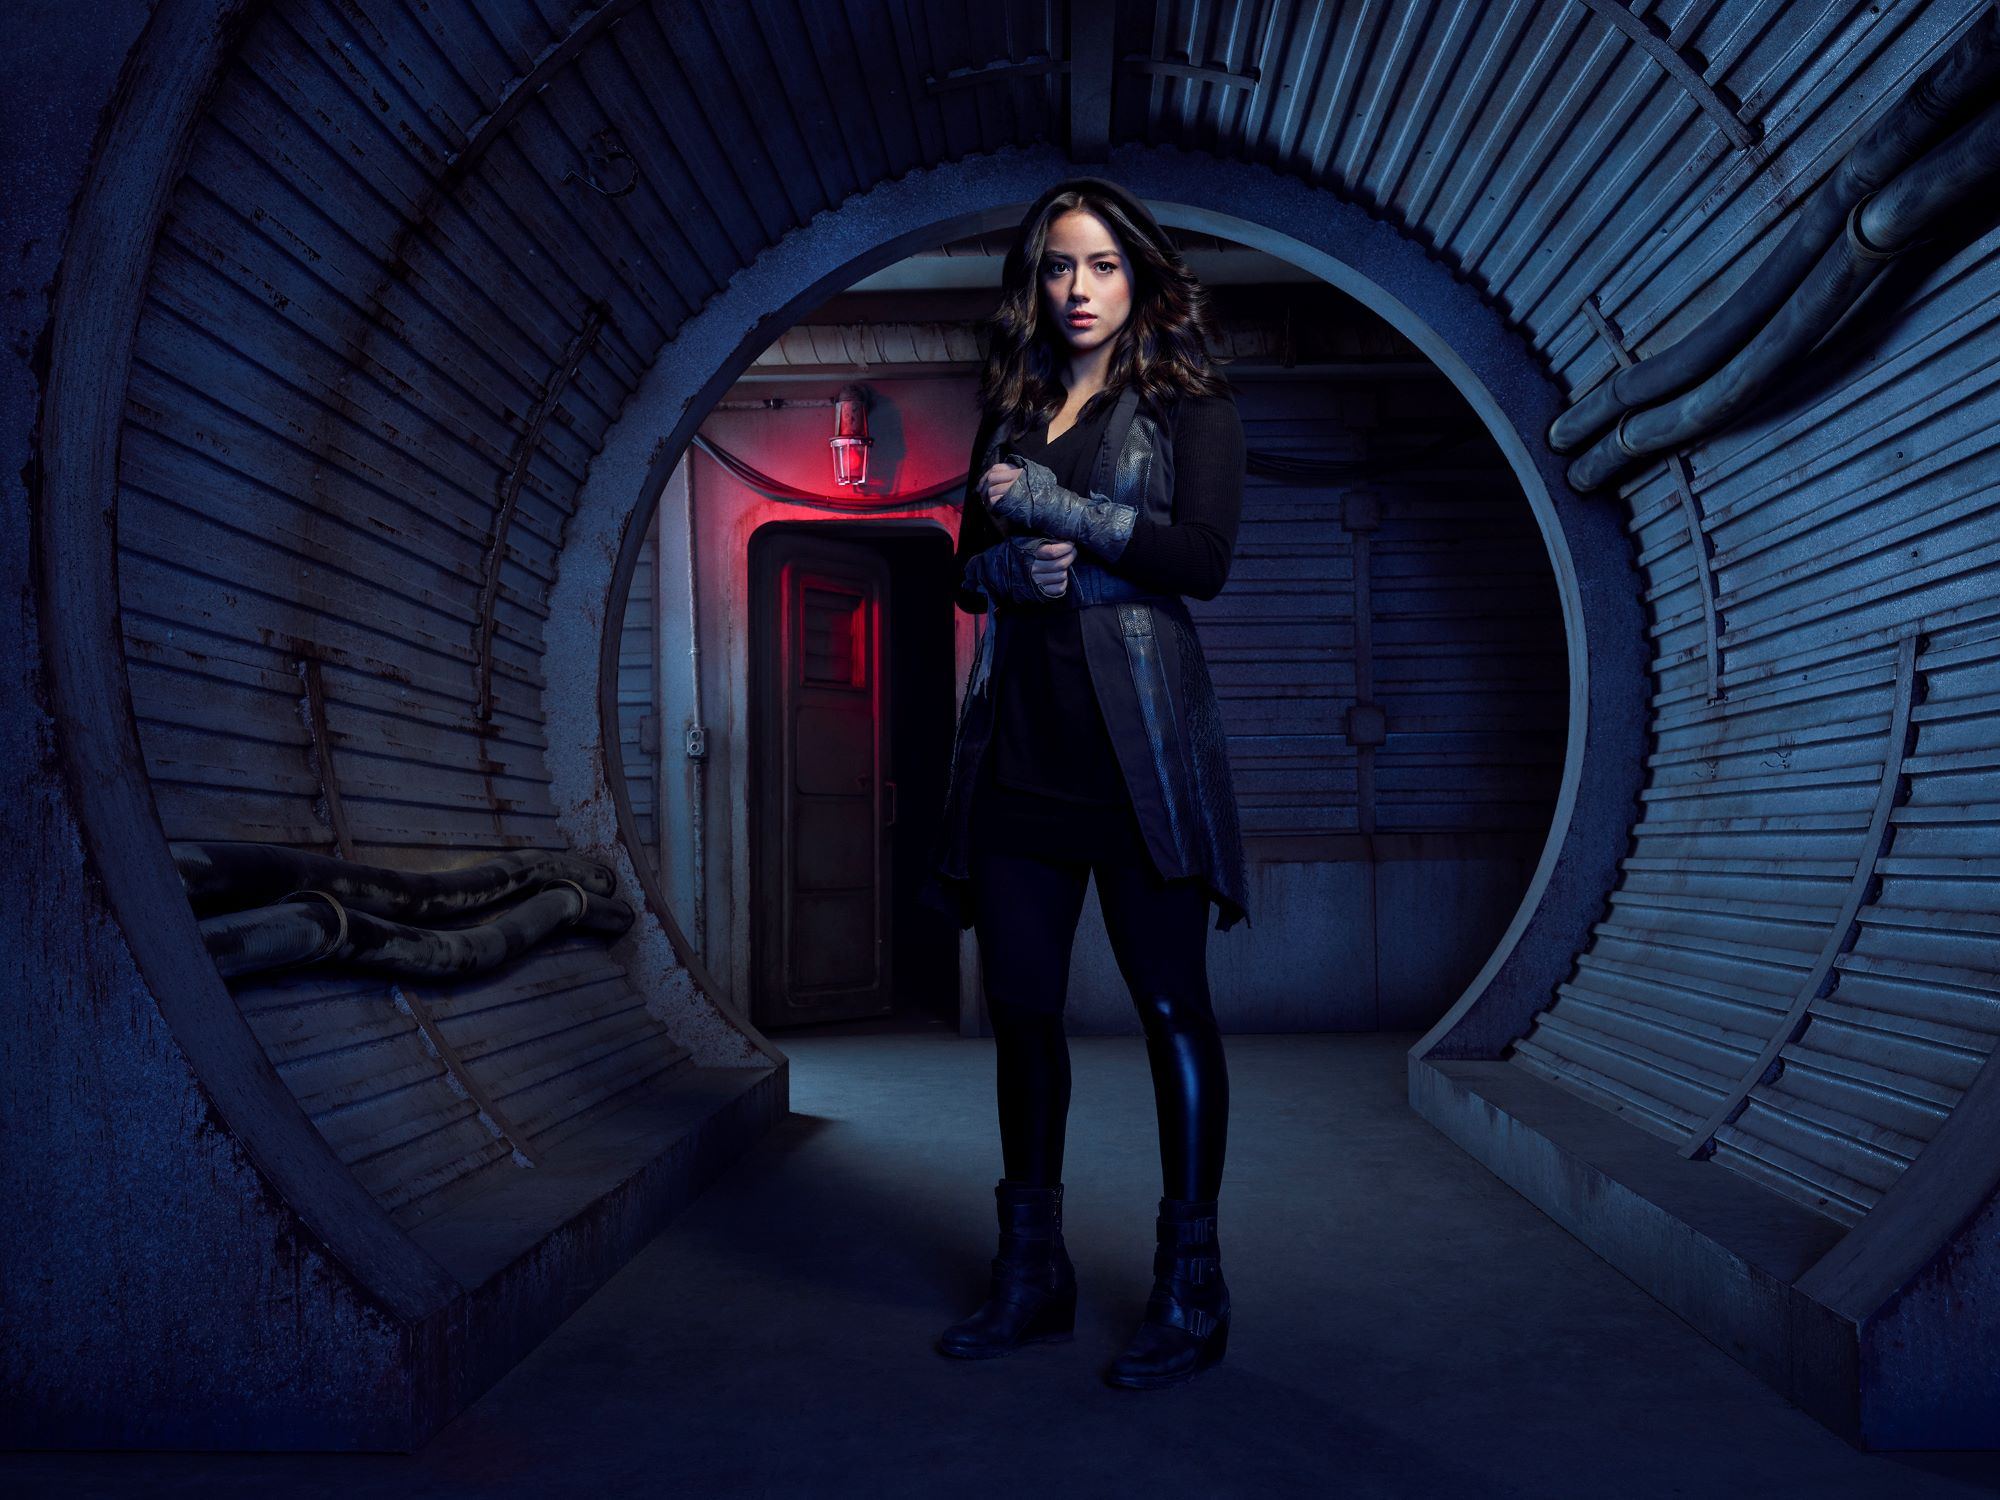 Marvel star Chloe Bennet, who is rumored to be in 'Secret Invasion,' poses as character Daisy Johnson in a tunnel. Bennet is dressed in all black, boots, pants, and hooded jacket.